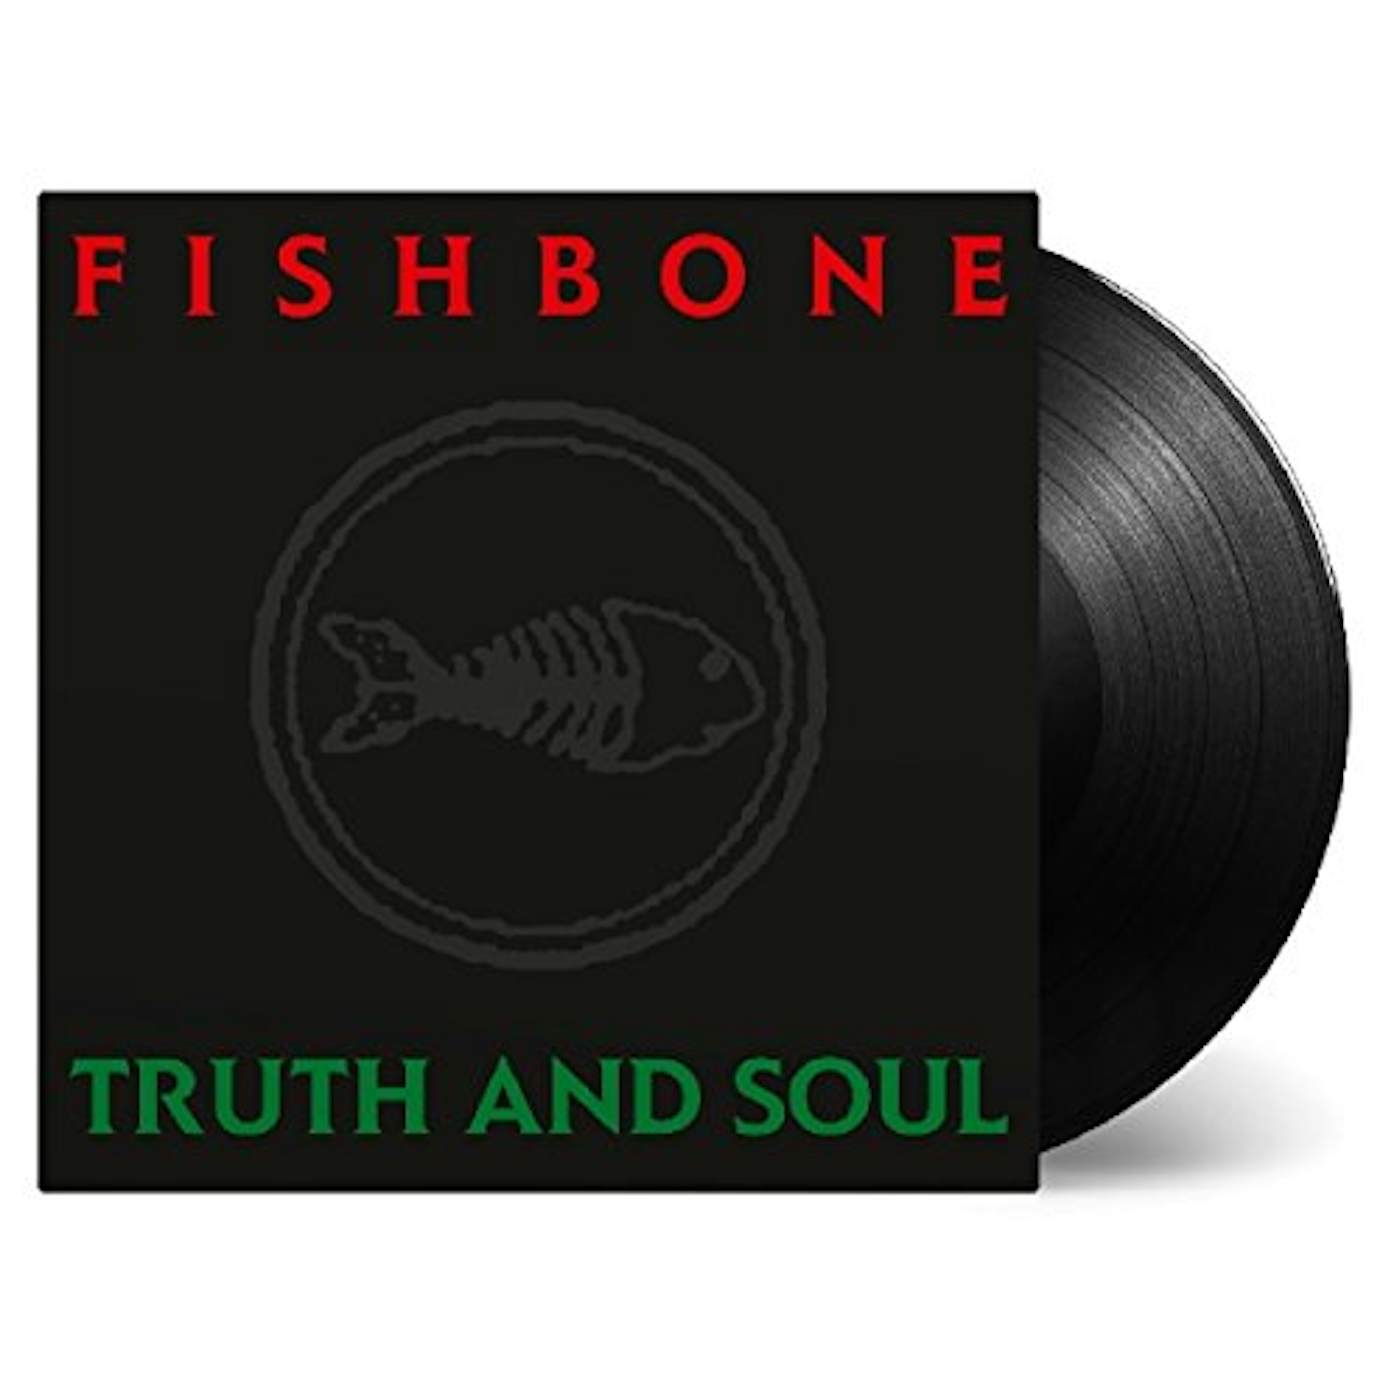 Fishbone Truth And Soul Vinyl Record